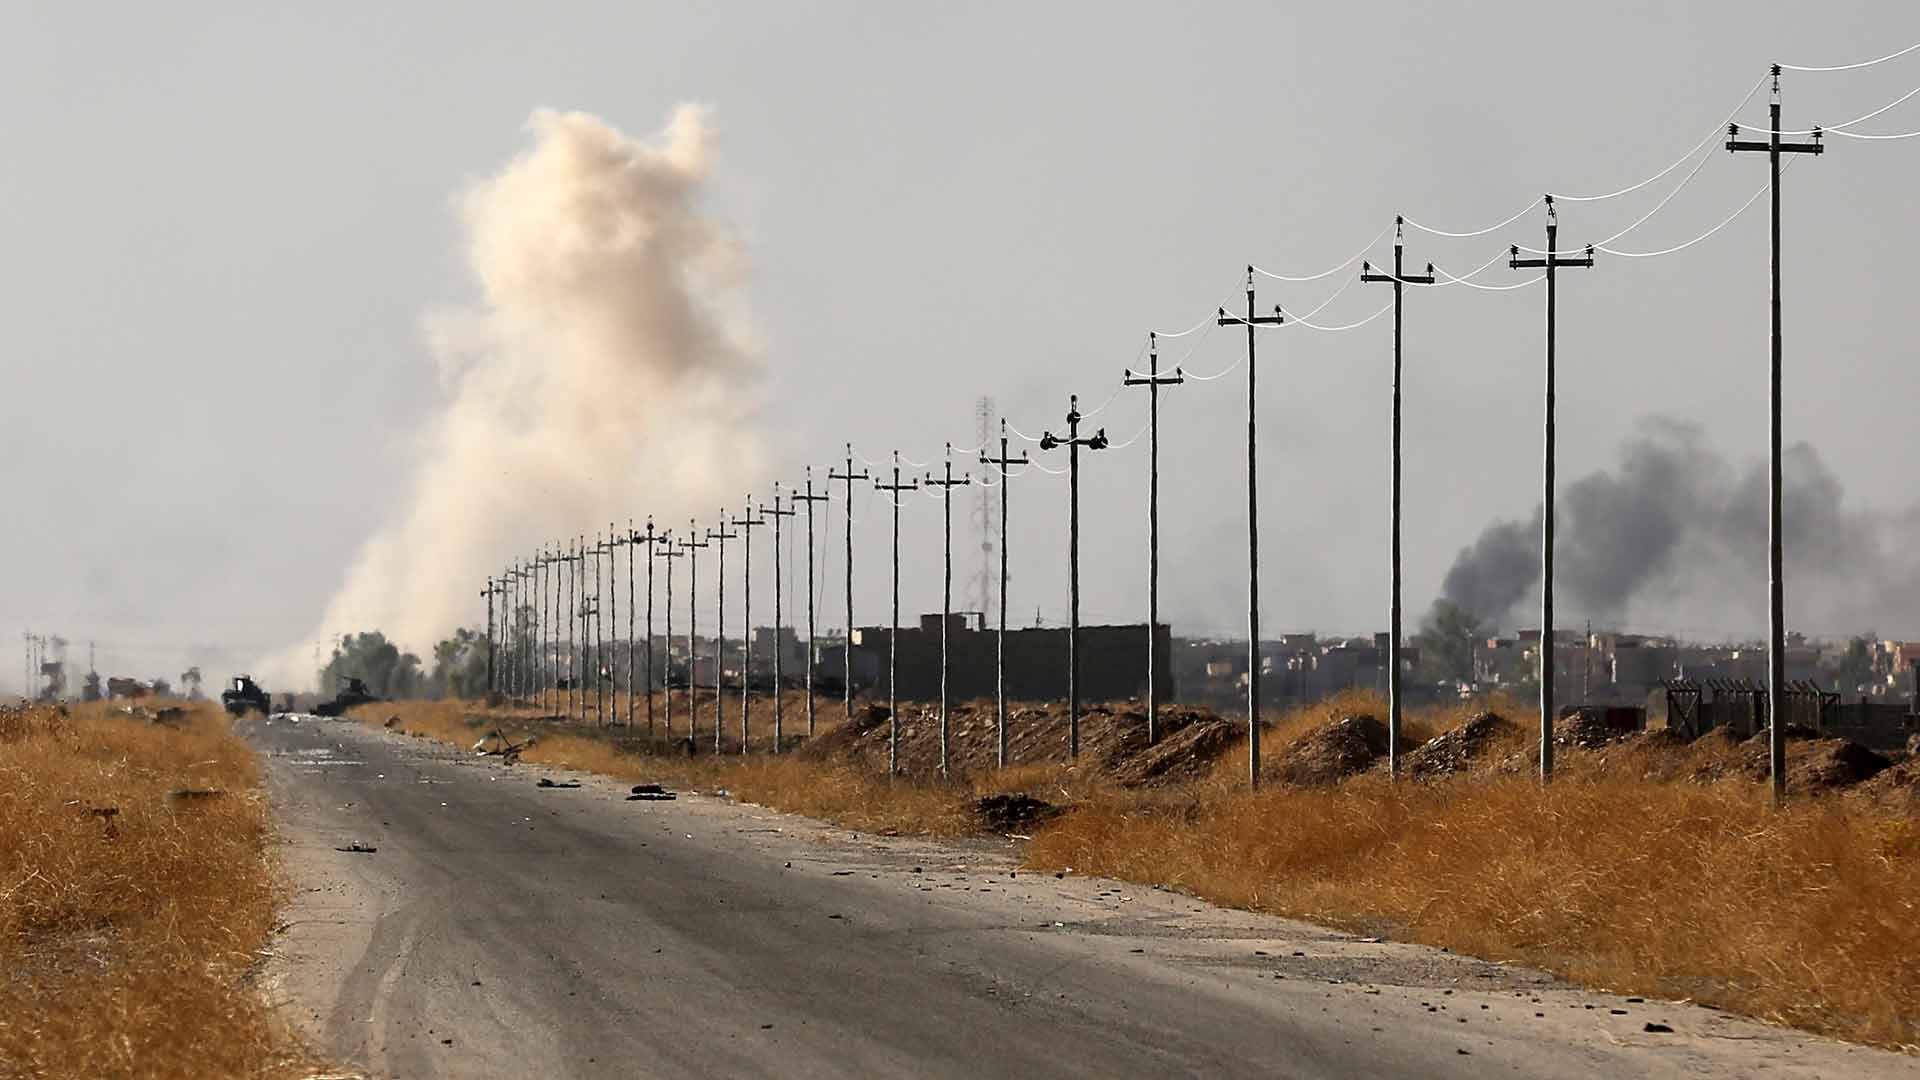 Smoke rises in nearby Mosul as Iraq's elite counterterrorism forces advance towards the city, Iraq, Thursday, Oct. 20, 2016. In a significant escalation of the battle for Mosul, elite Iraqi special forces joined the fight Thursday, unleashing a pre-dawn assault on an Islamic State-held town east of the besieged city. (AP Photo/Khalid Mohammed)